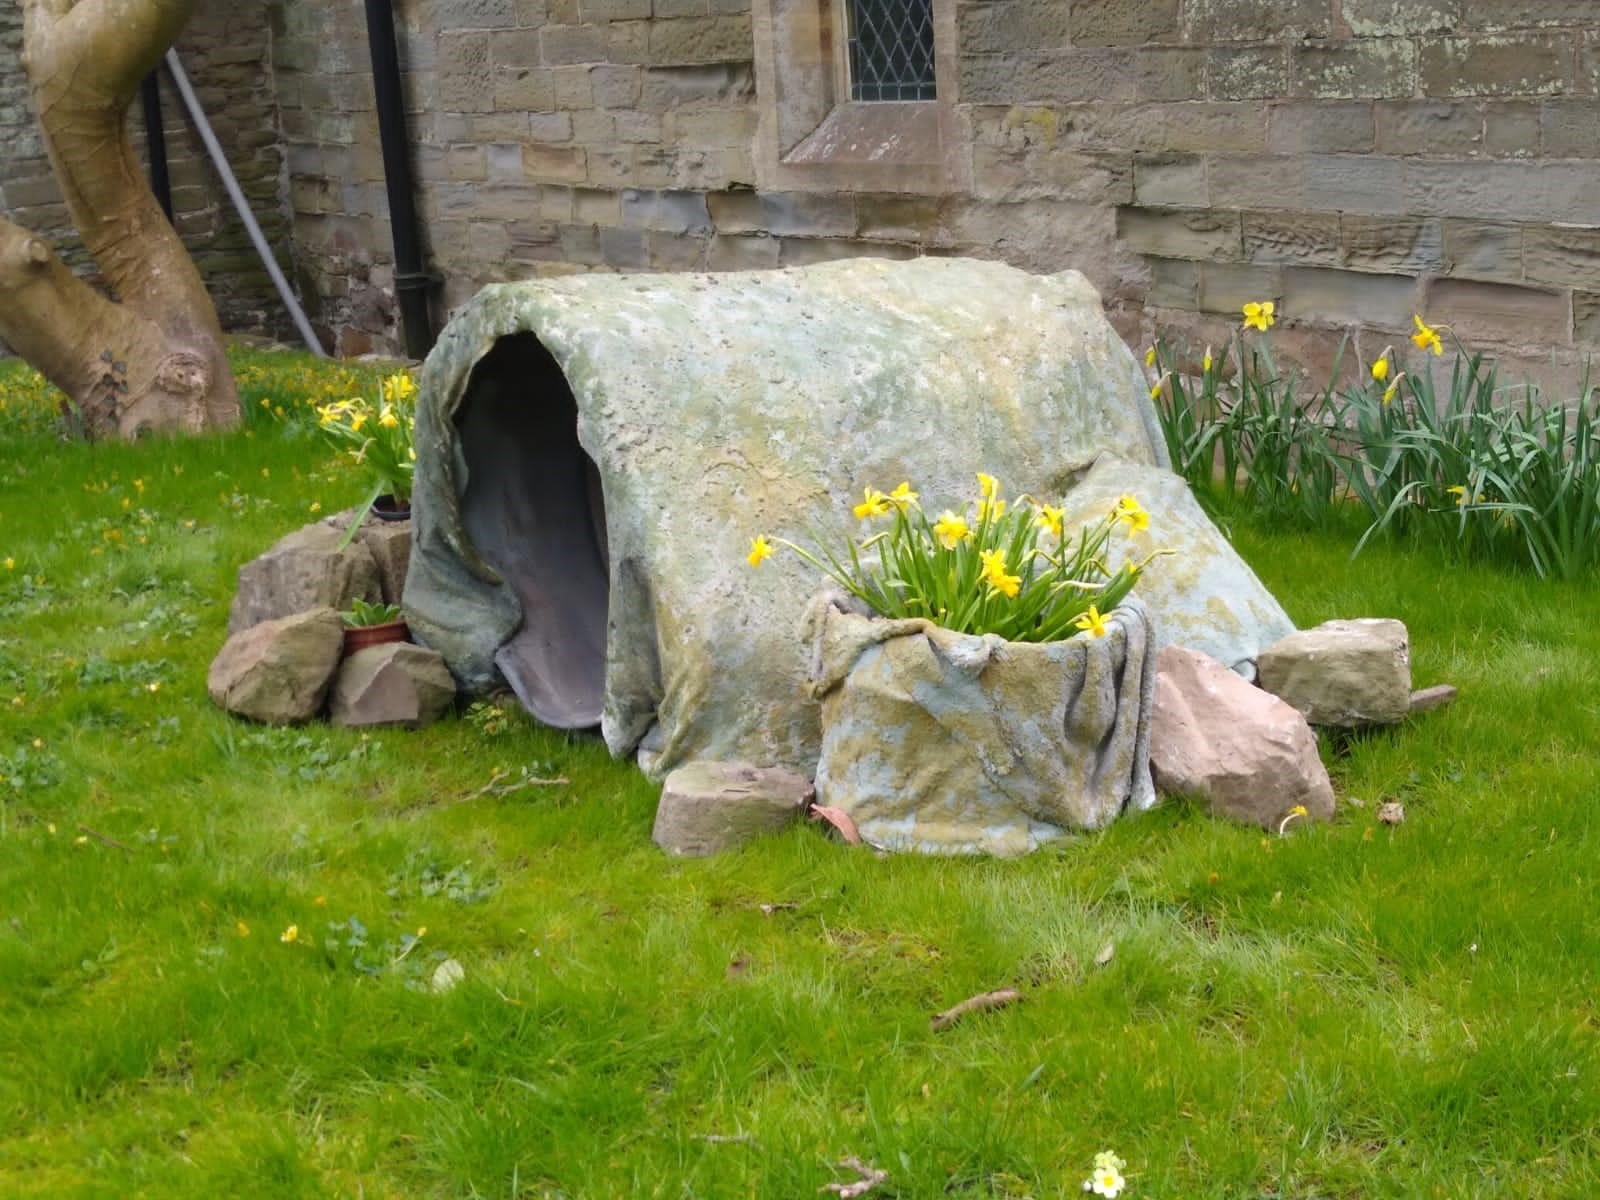 The Easter Tomb.  Our thanks to Sally for being so creative!